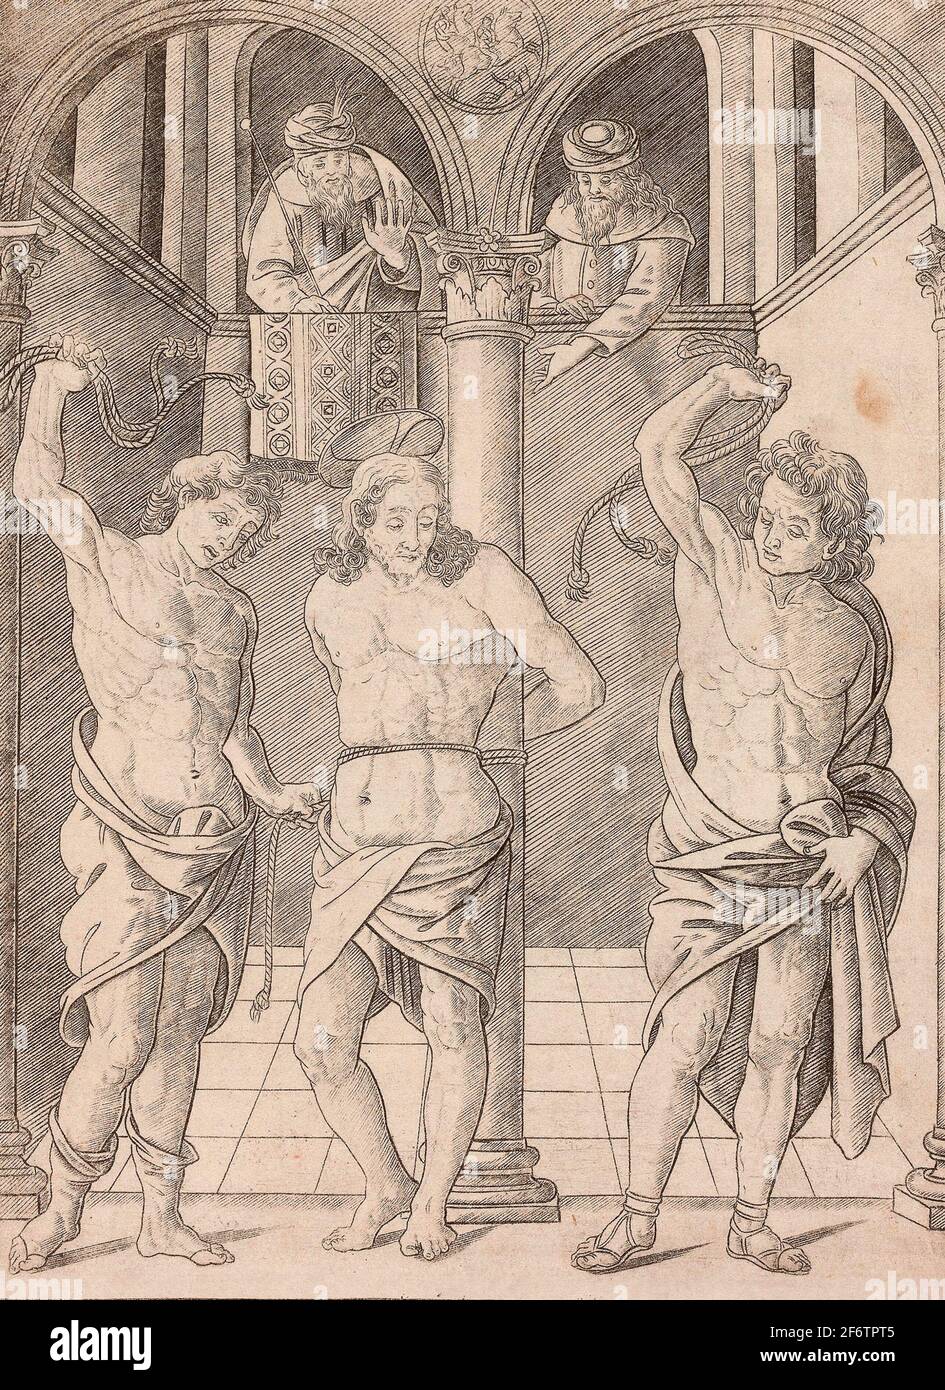 Francesco Rosselli. The Flagellation, plate 7 from the Life of the Virgin and Christ-c. 1470-Francesco Rosselli Italian, 1448-c. 1513. Engraving in Stock Photo